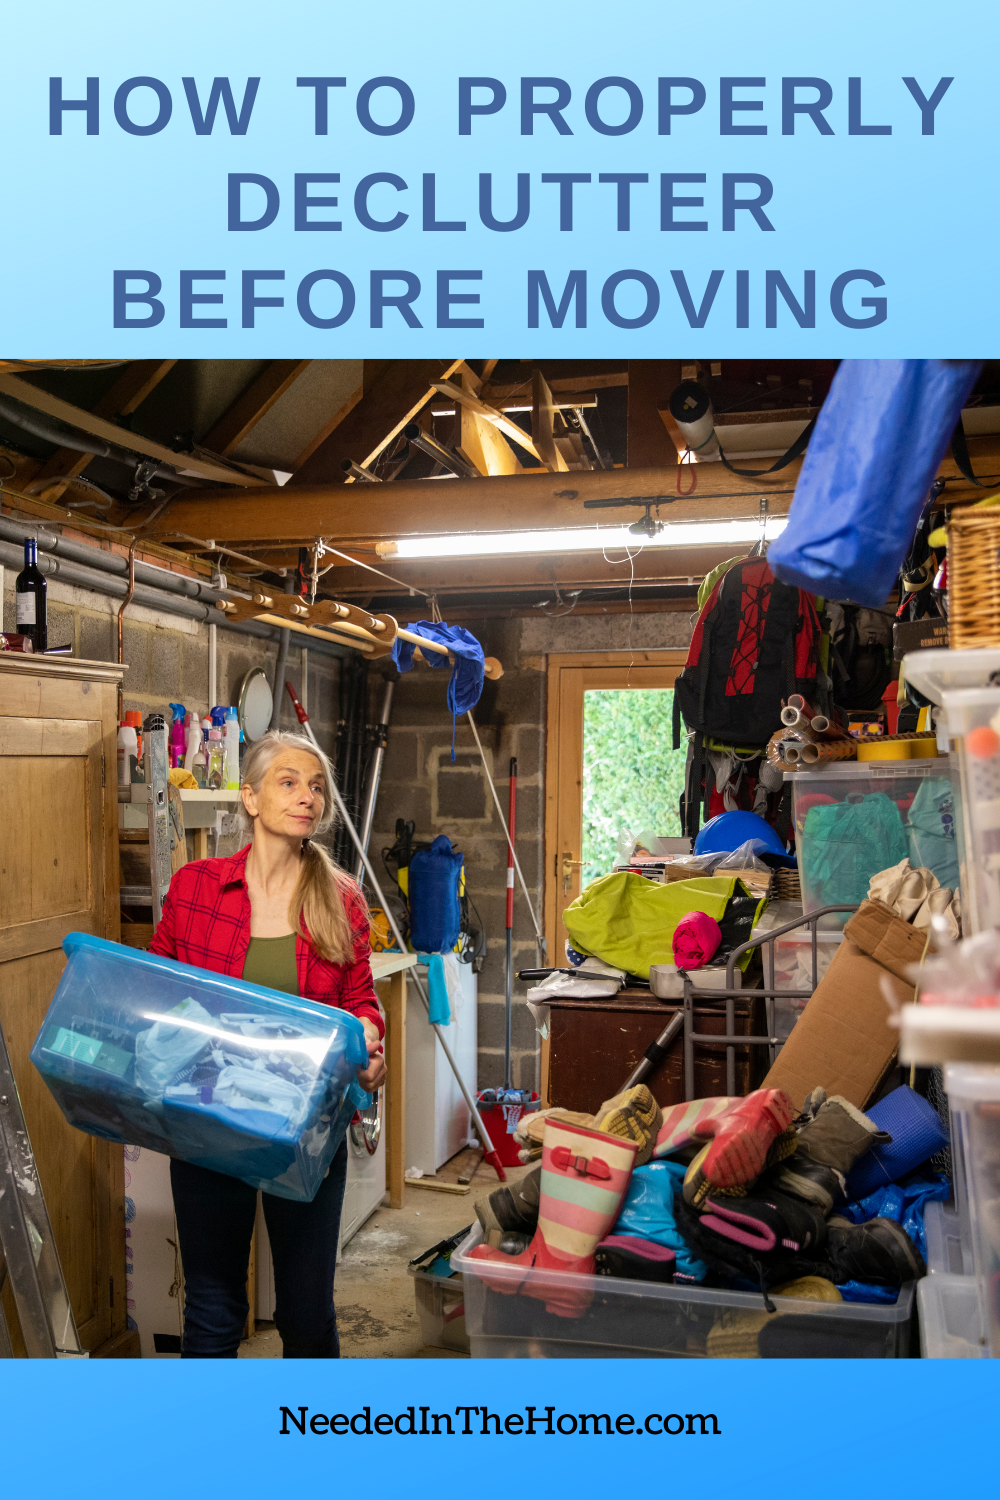 pinterest-pin-description how to properly declutter before moving woman packing her attic room neededinthehome